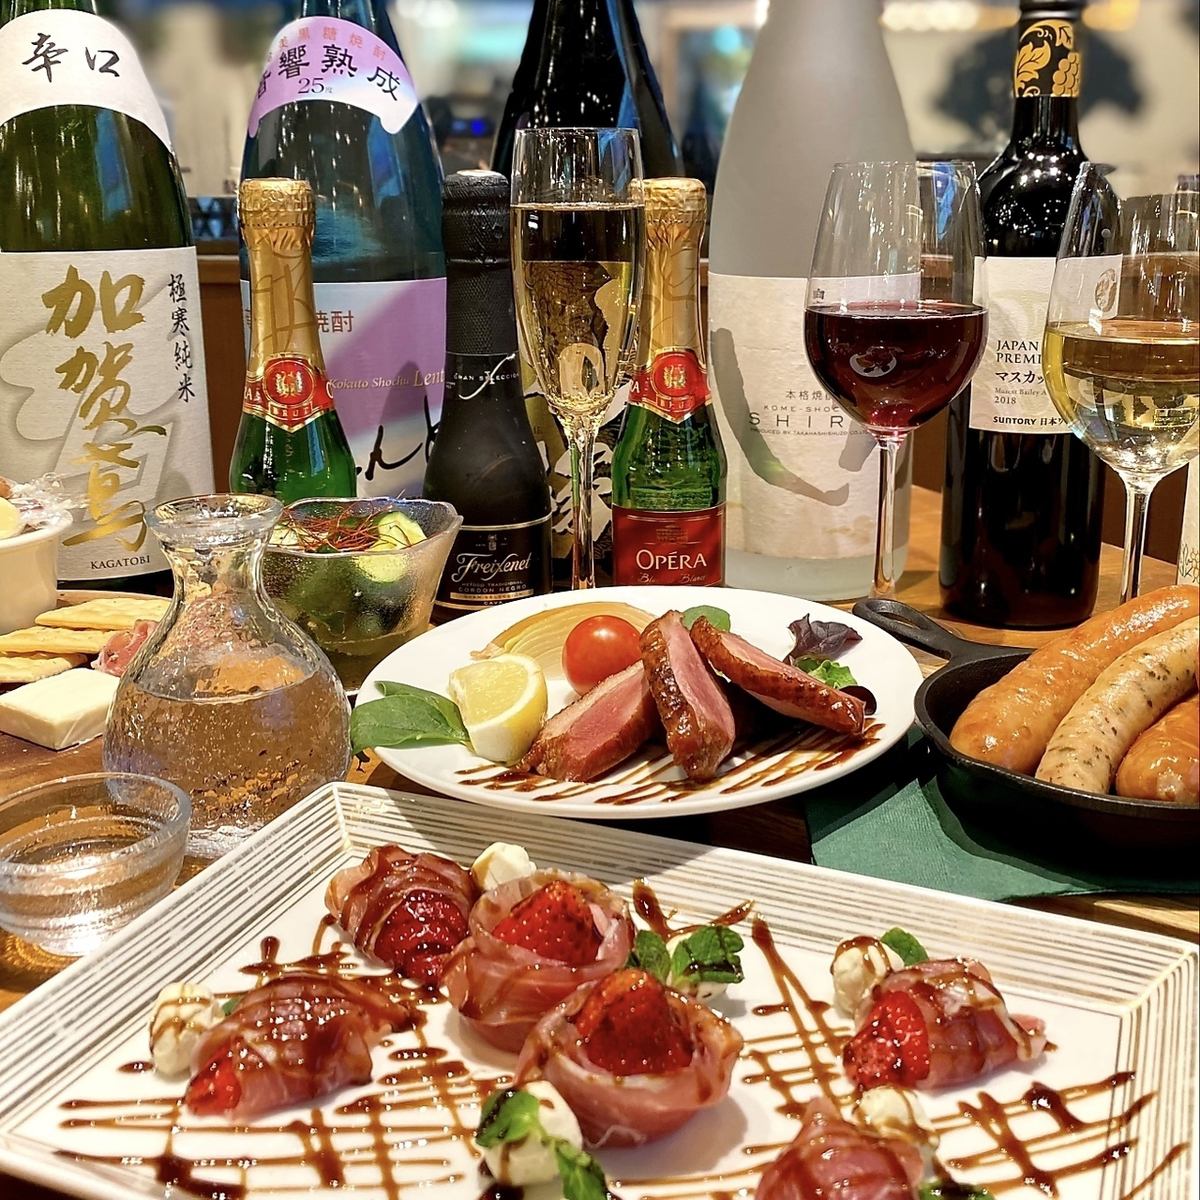 Unless you make a private reservation, it will operate normally as an izakaya! Have a wonderful time at this little-known spot near Shibuya Station! From izakaya use to private use, leave the banquet to "Shibuya Garden Space Dogenzaka Branch"!